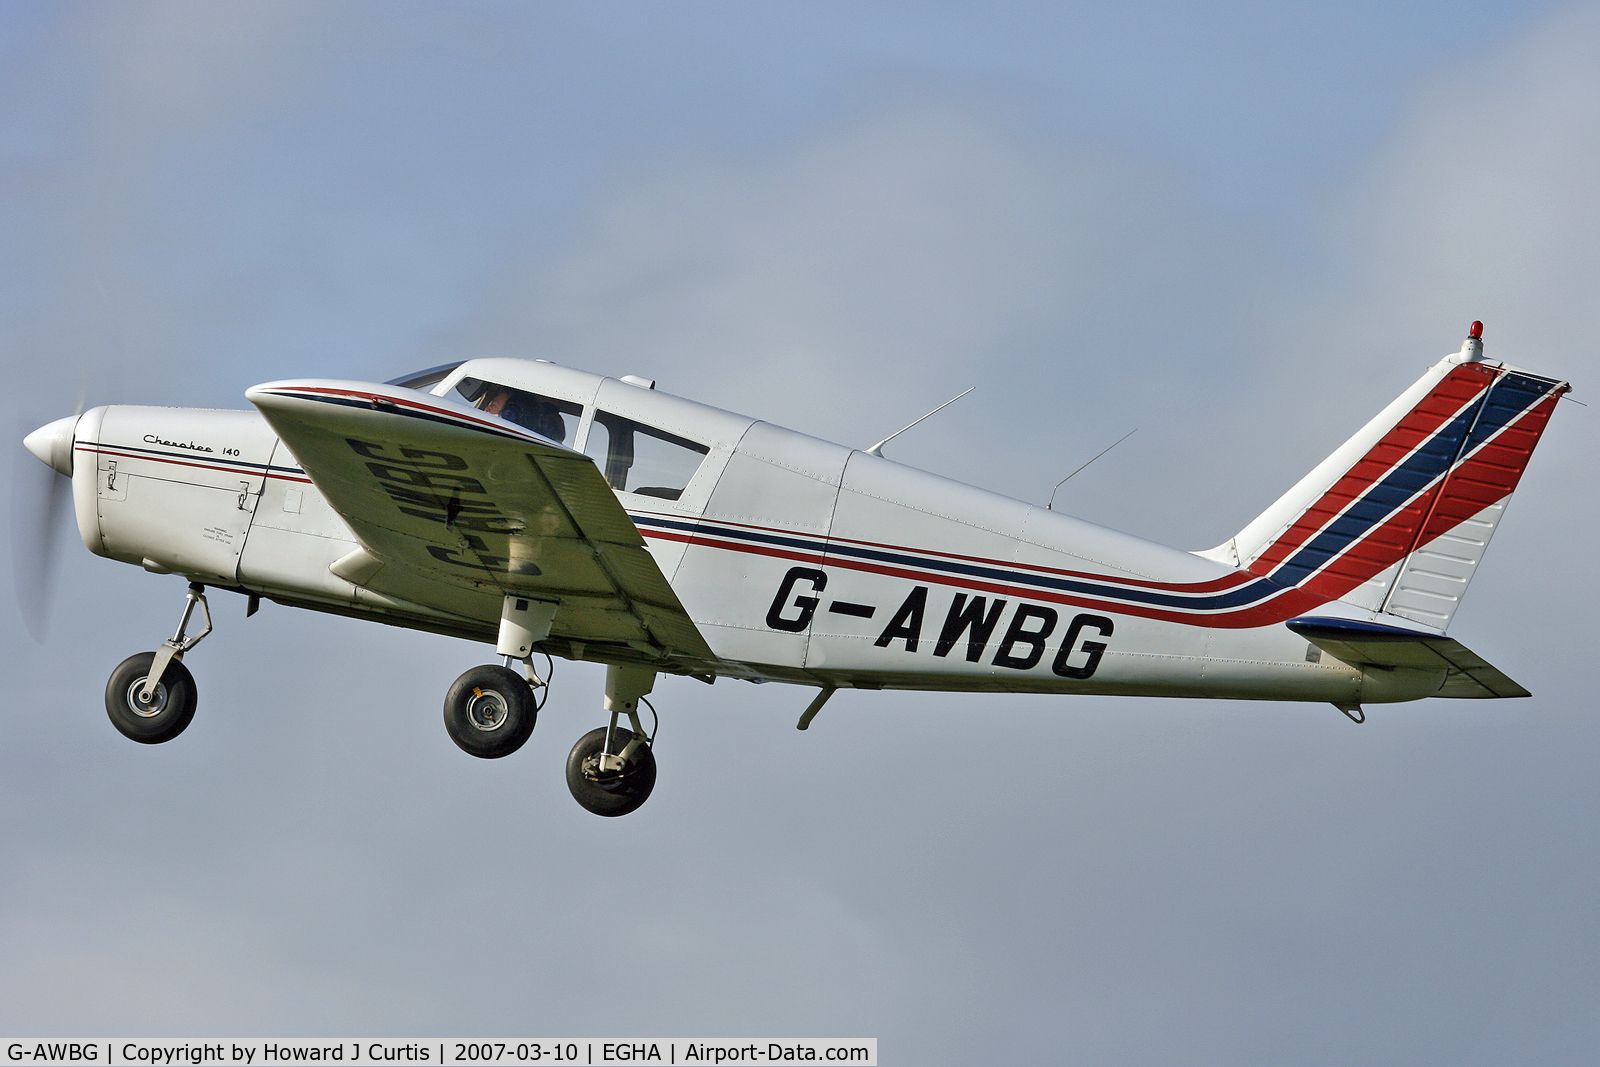 G-AWBG, 1968 Piper PA-28-140 Cherokee C/N 28-24286, Privately owned.